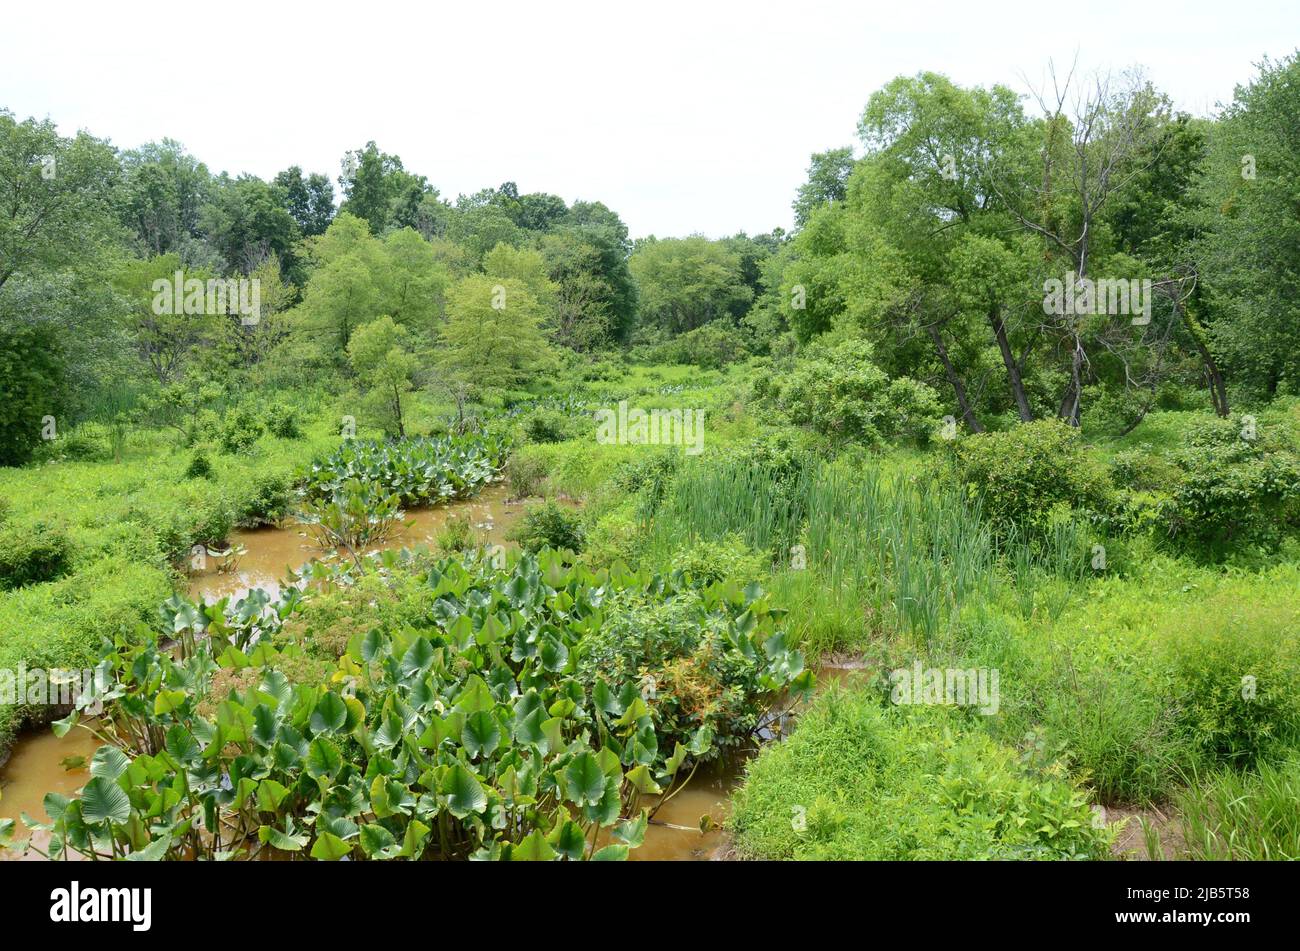 green plants in muddy or murky water in swamp or wetland. Stock Photo